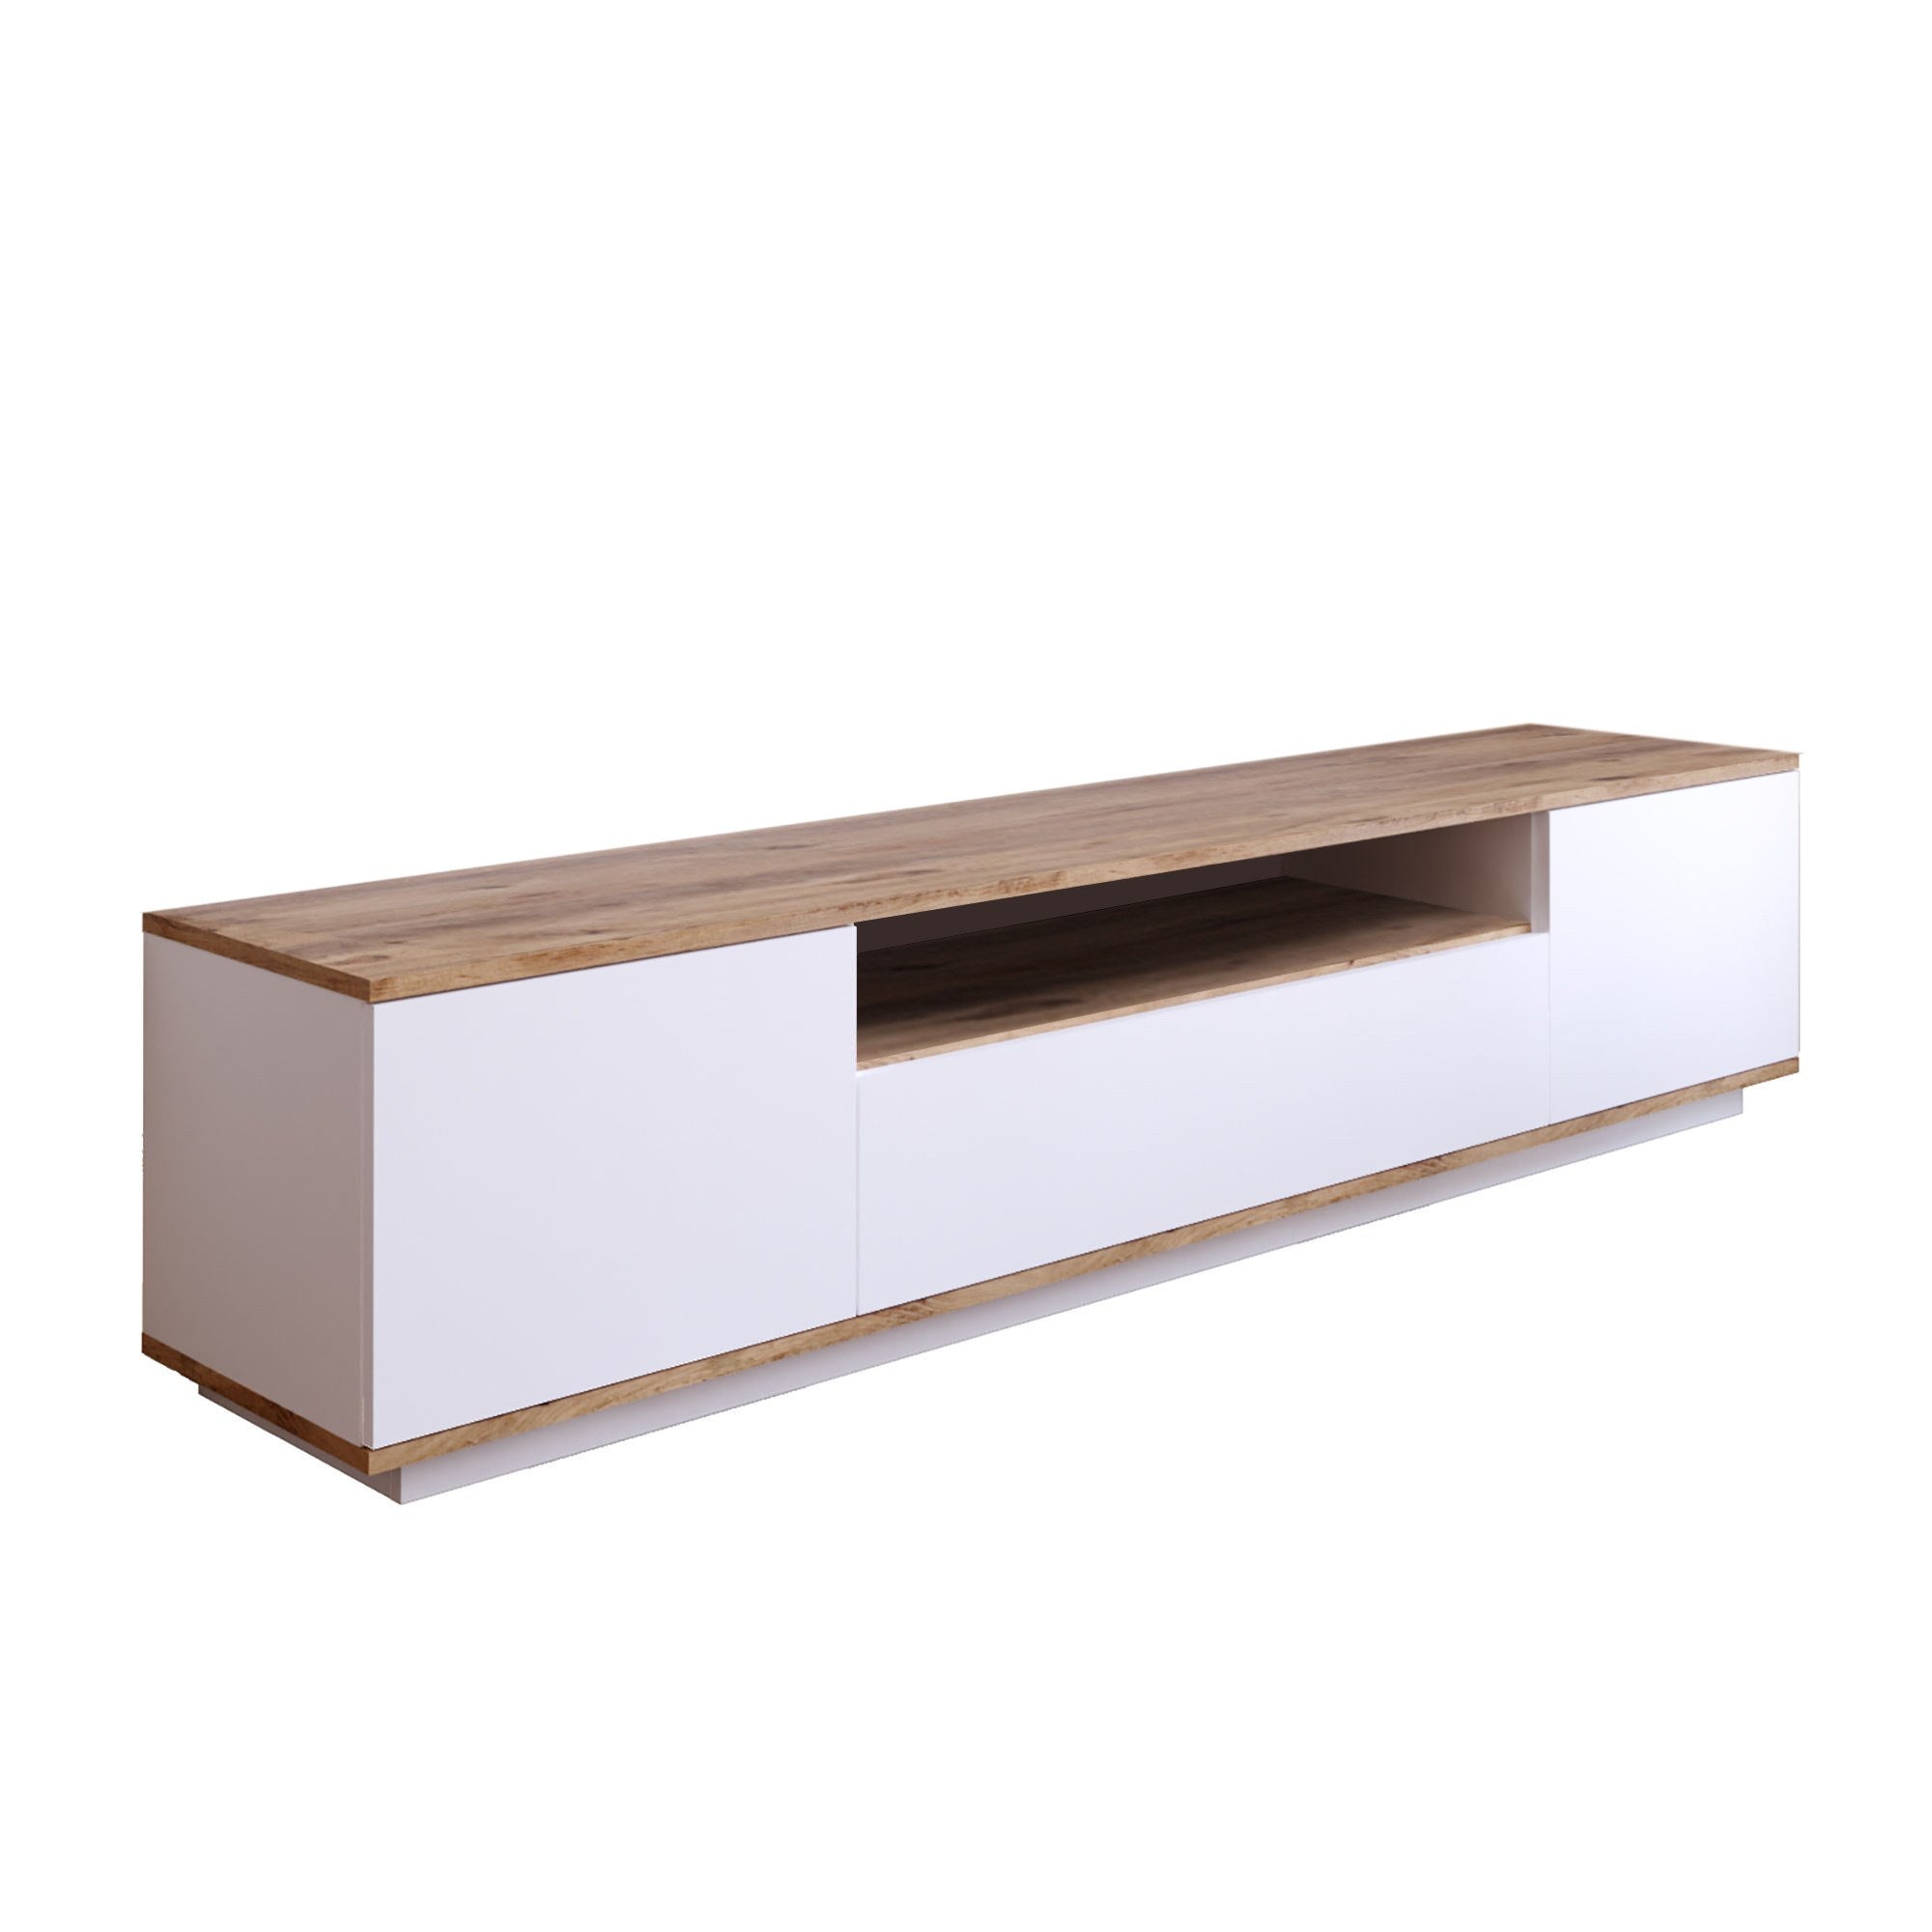 TV Stand FR7 - AW